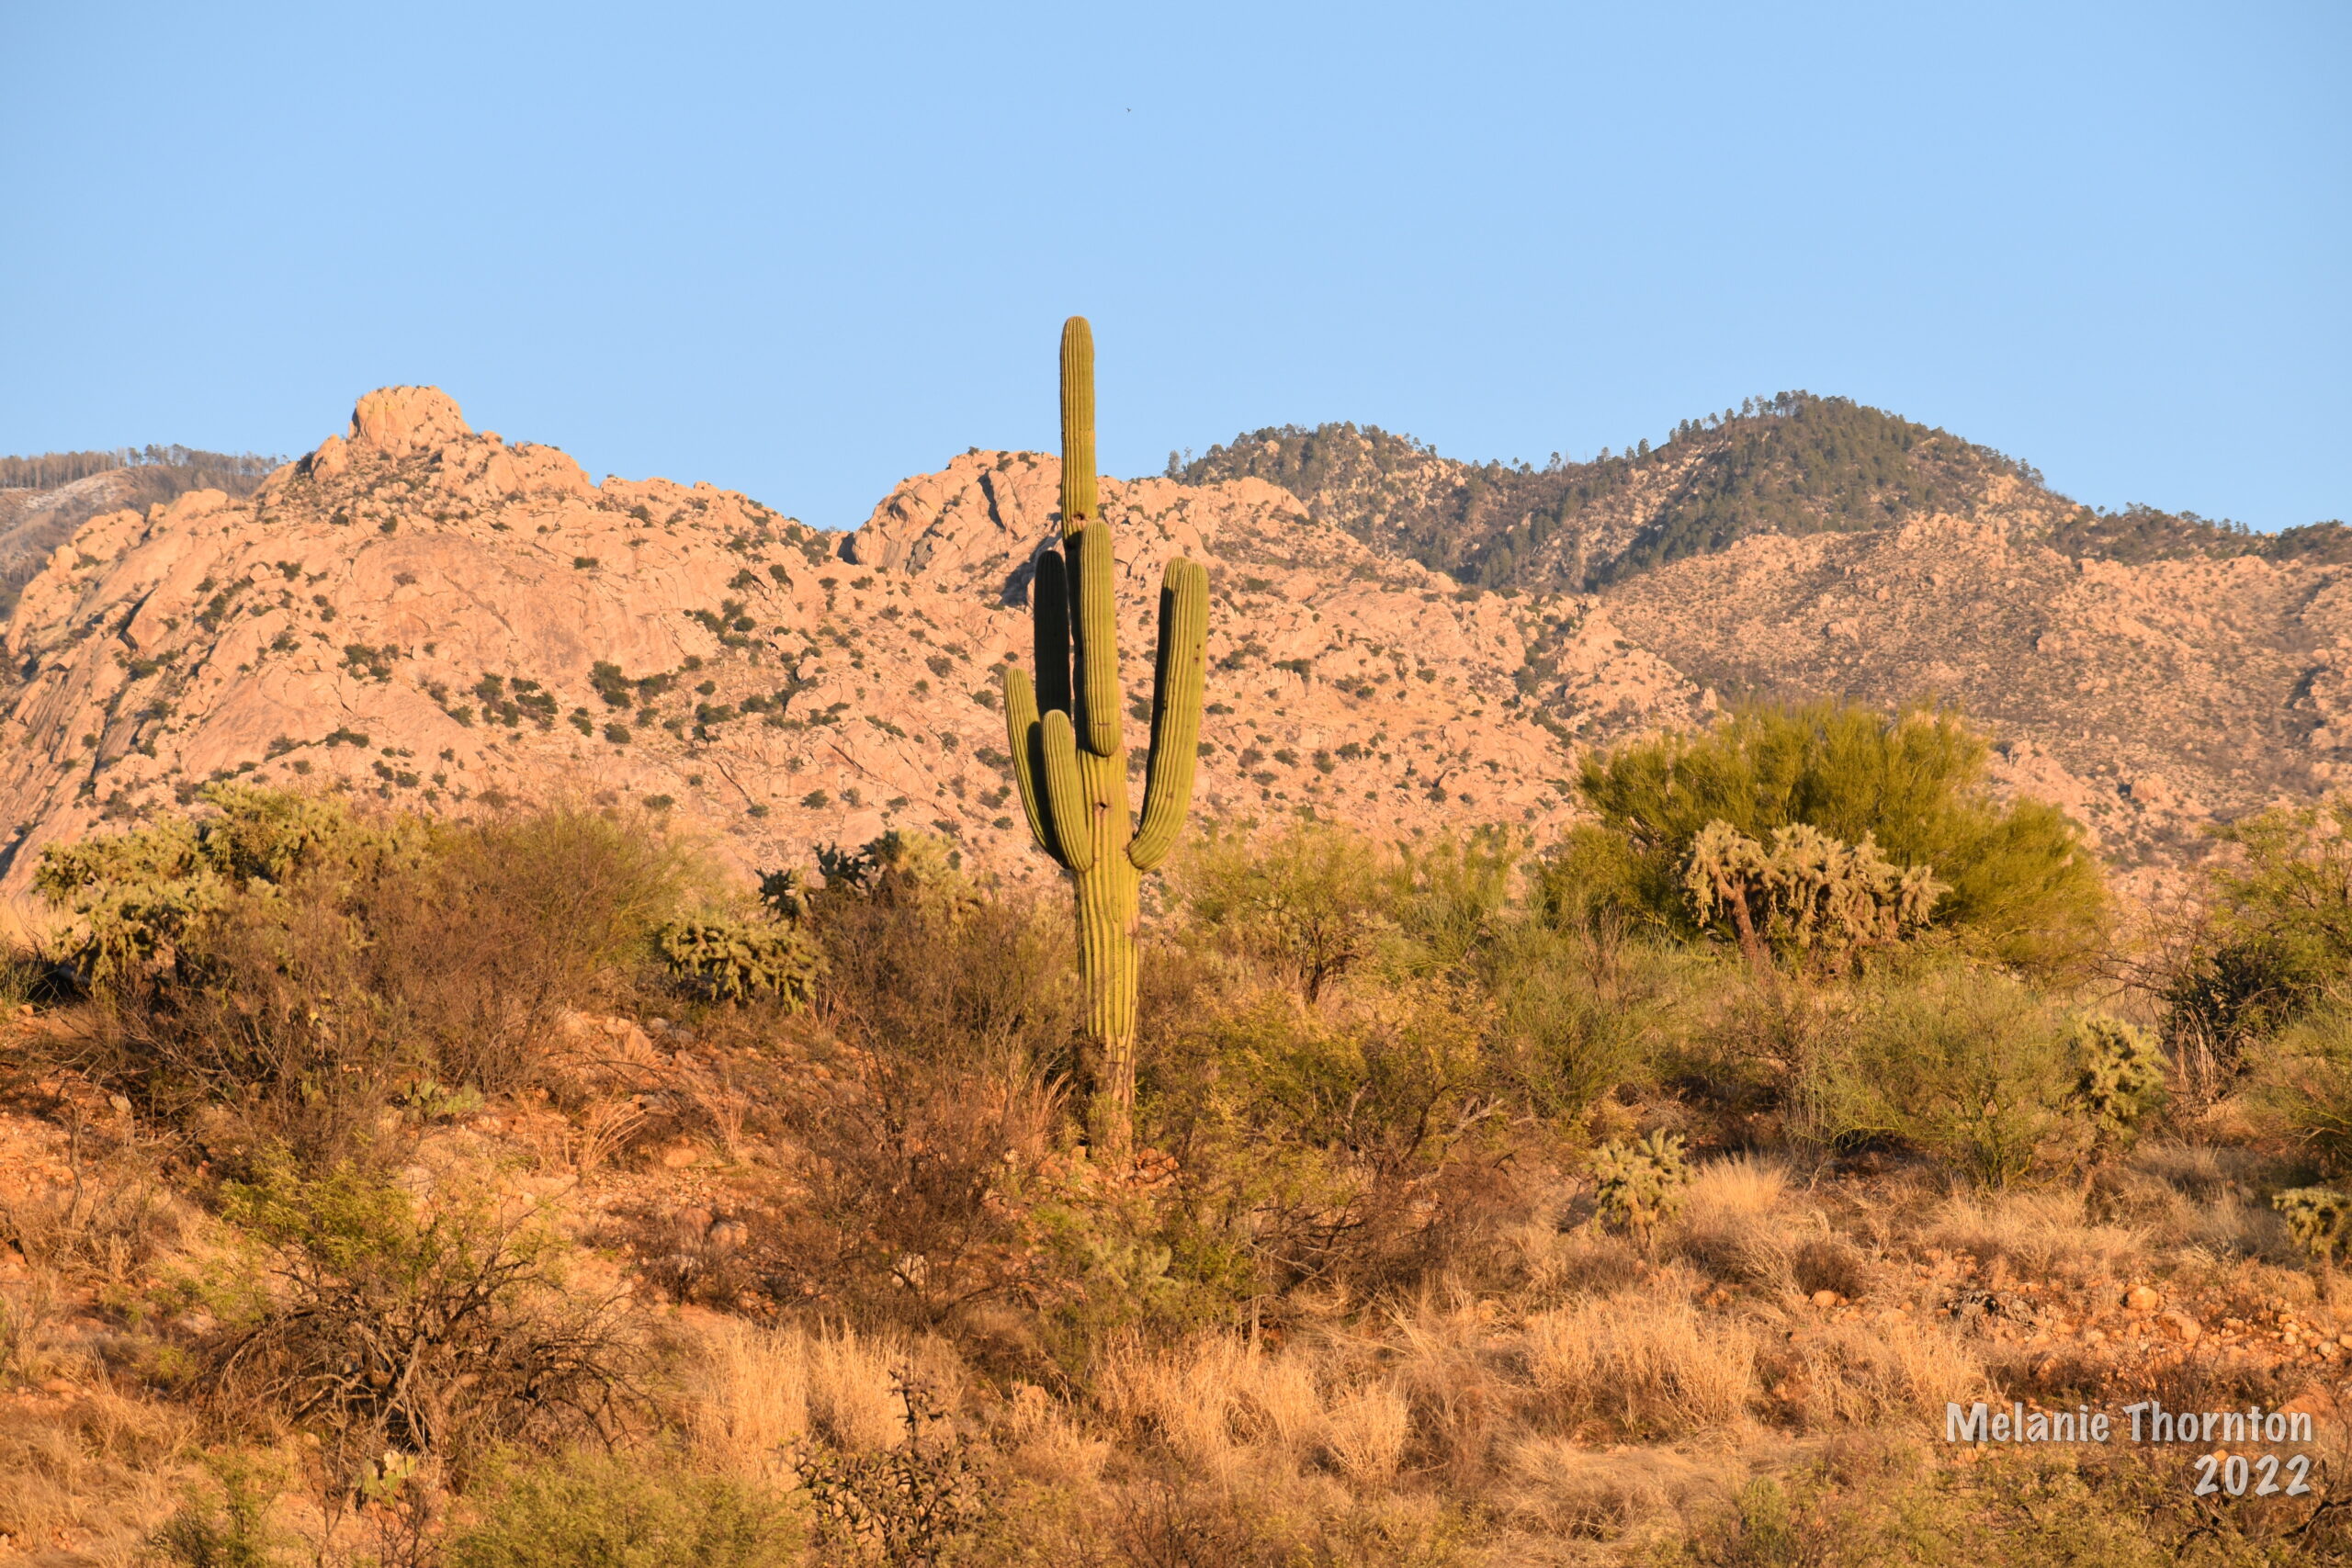 Tall cactus among orange-colored rock formations